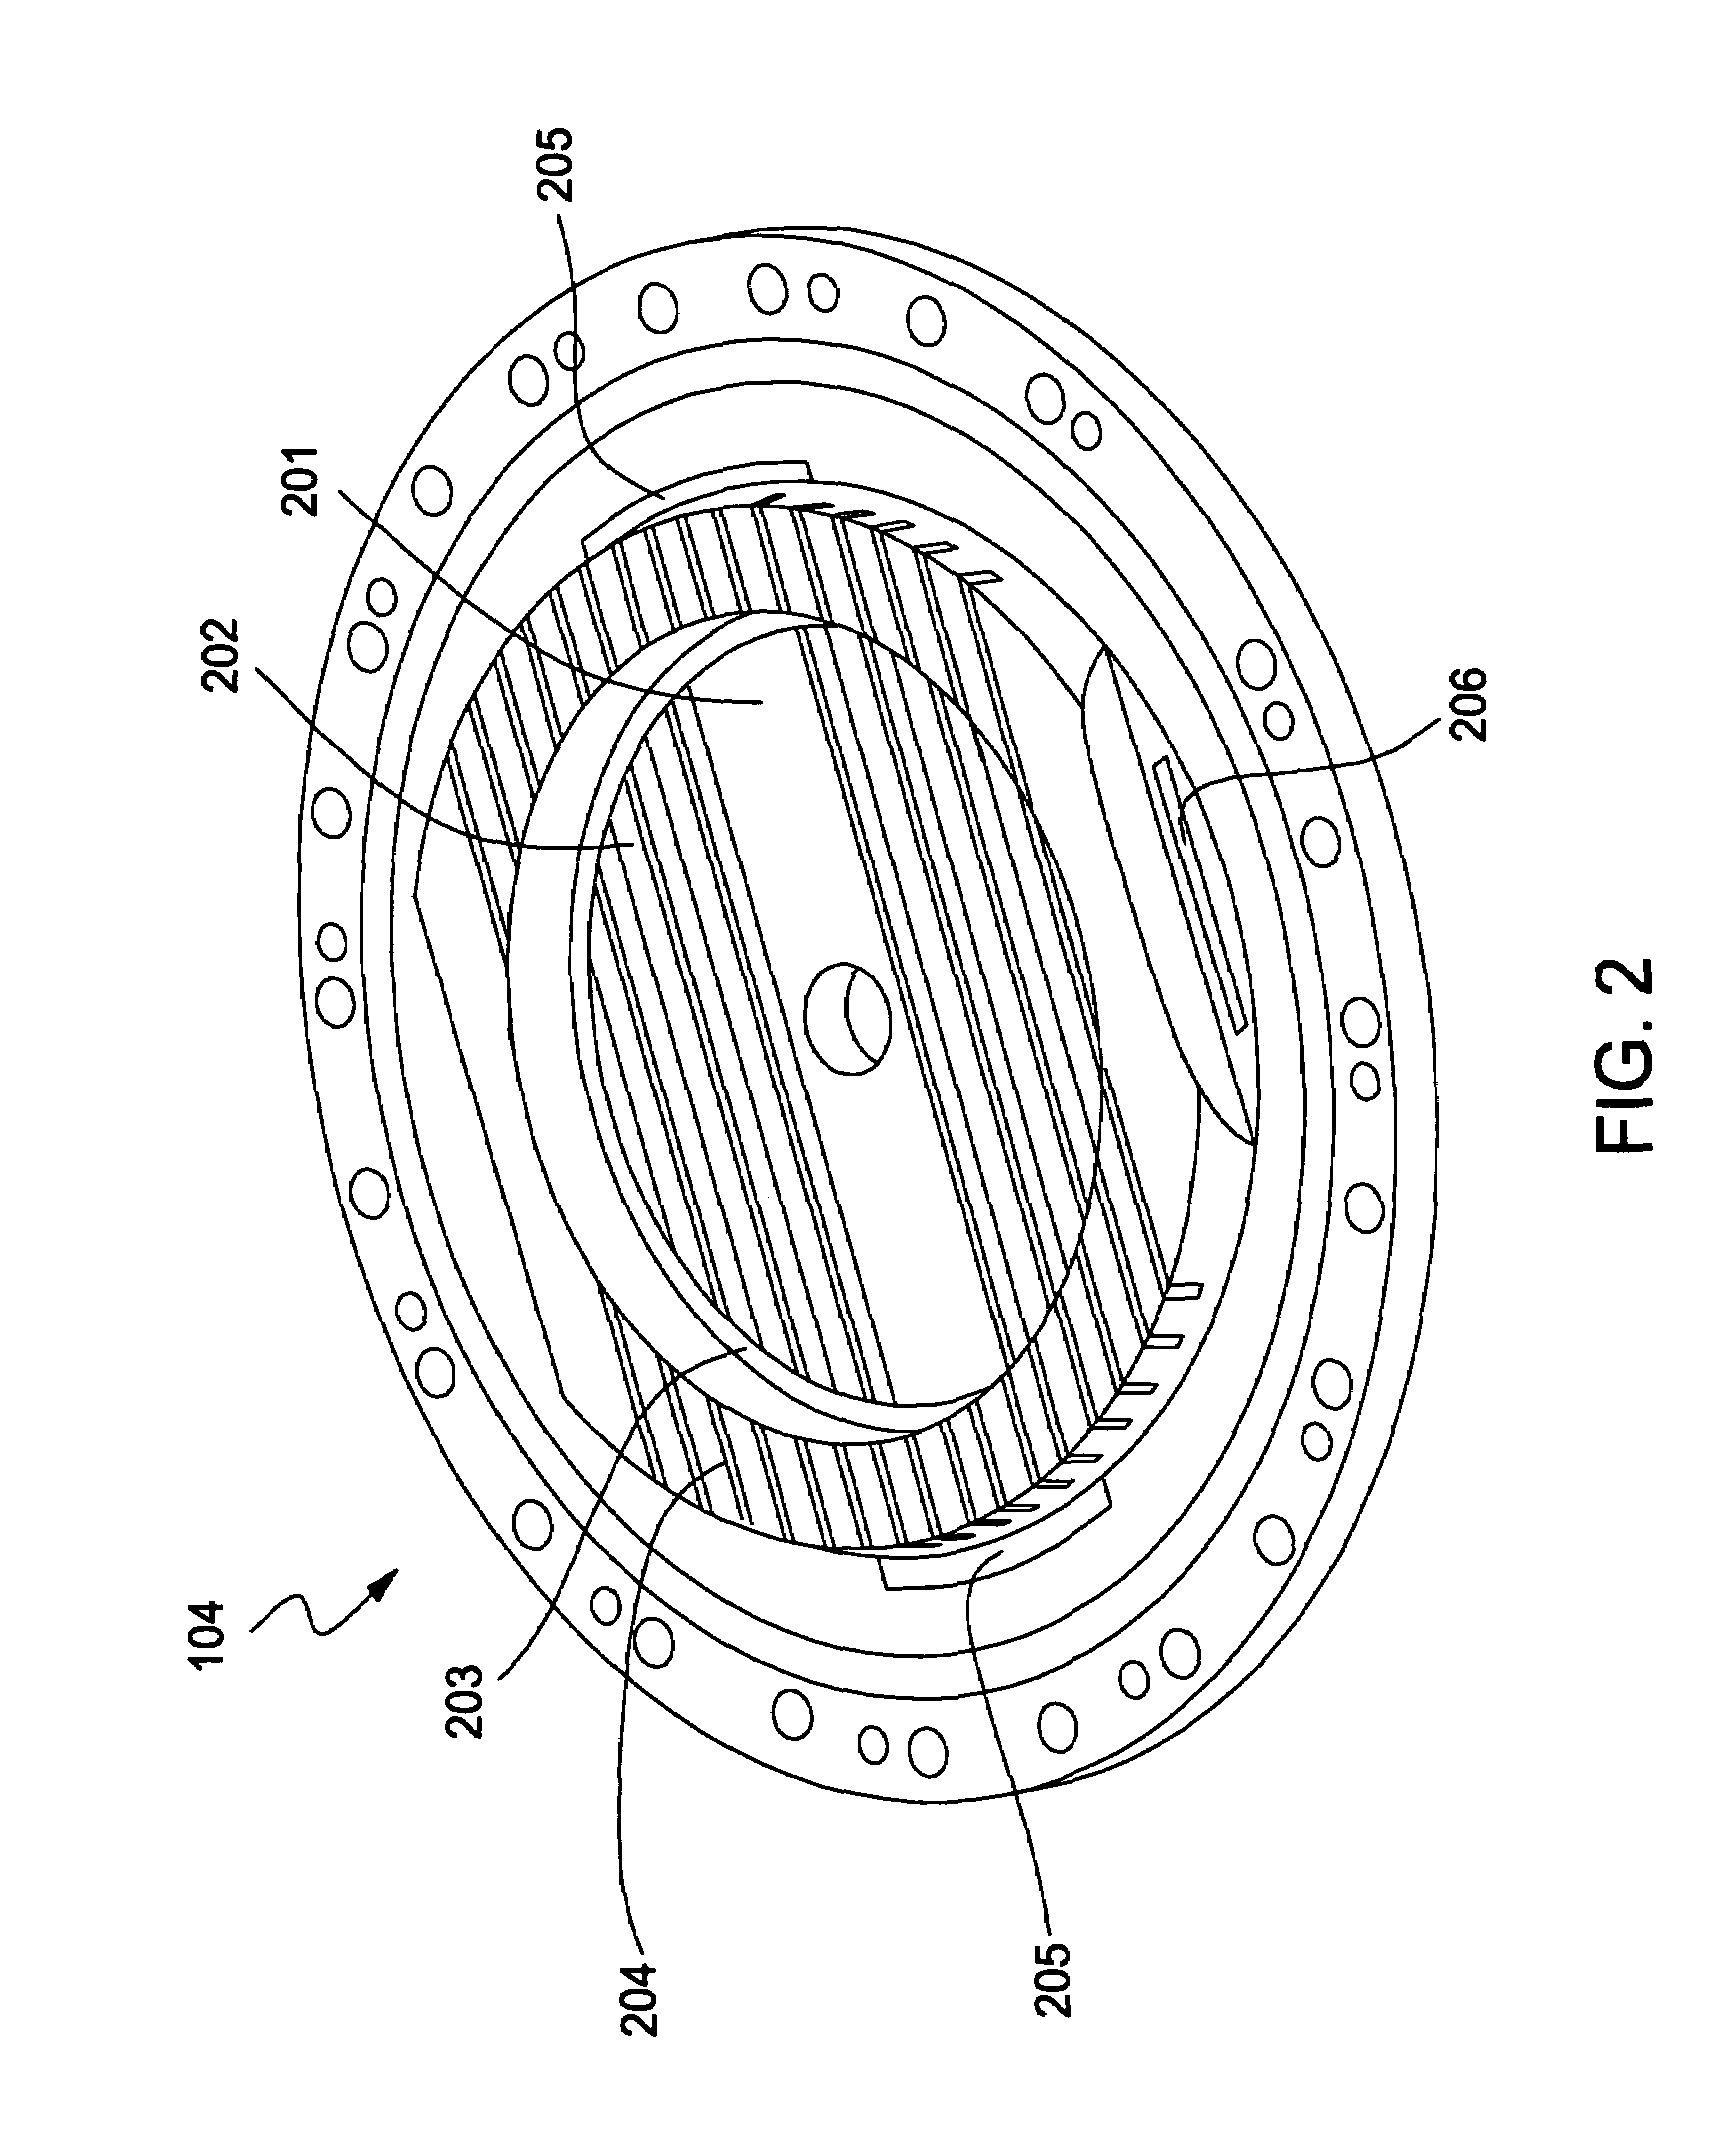 Electrochemical processing cell